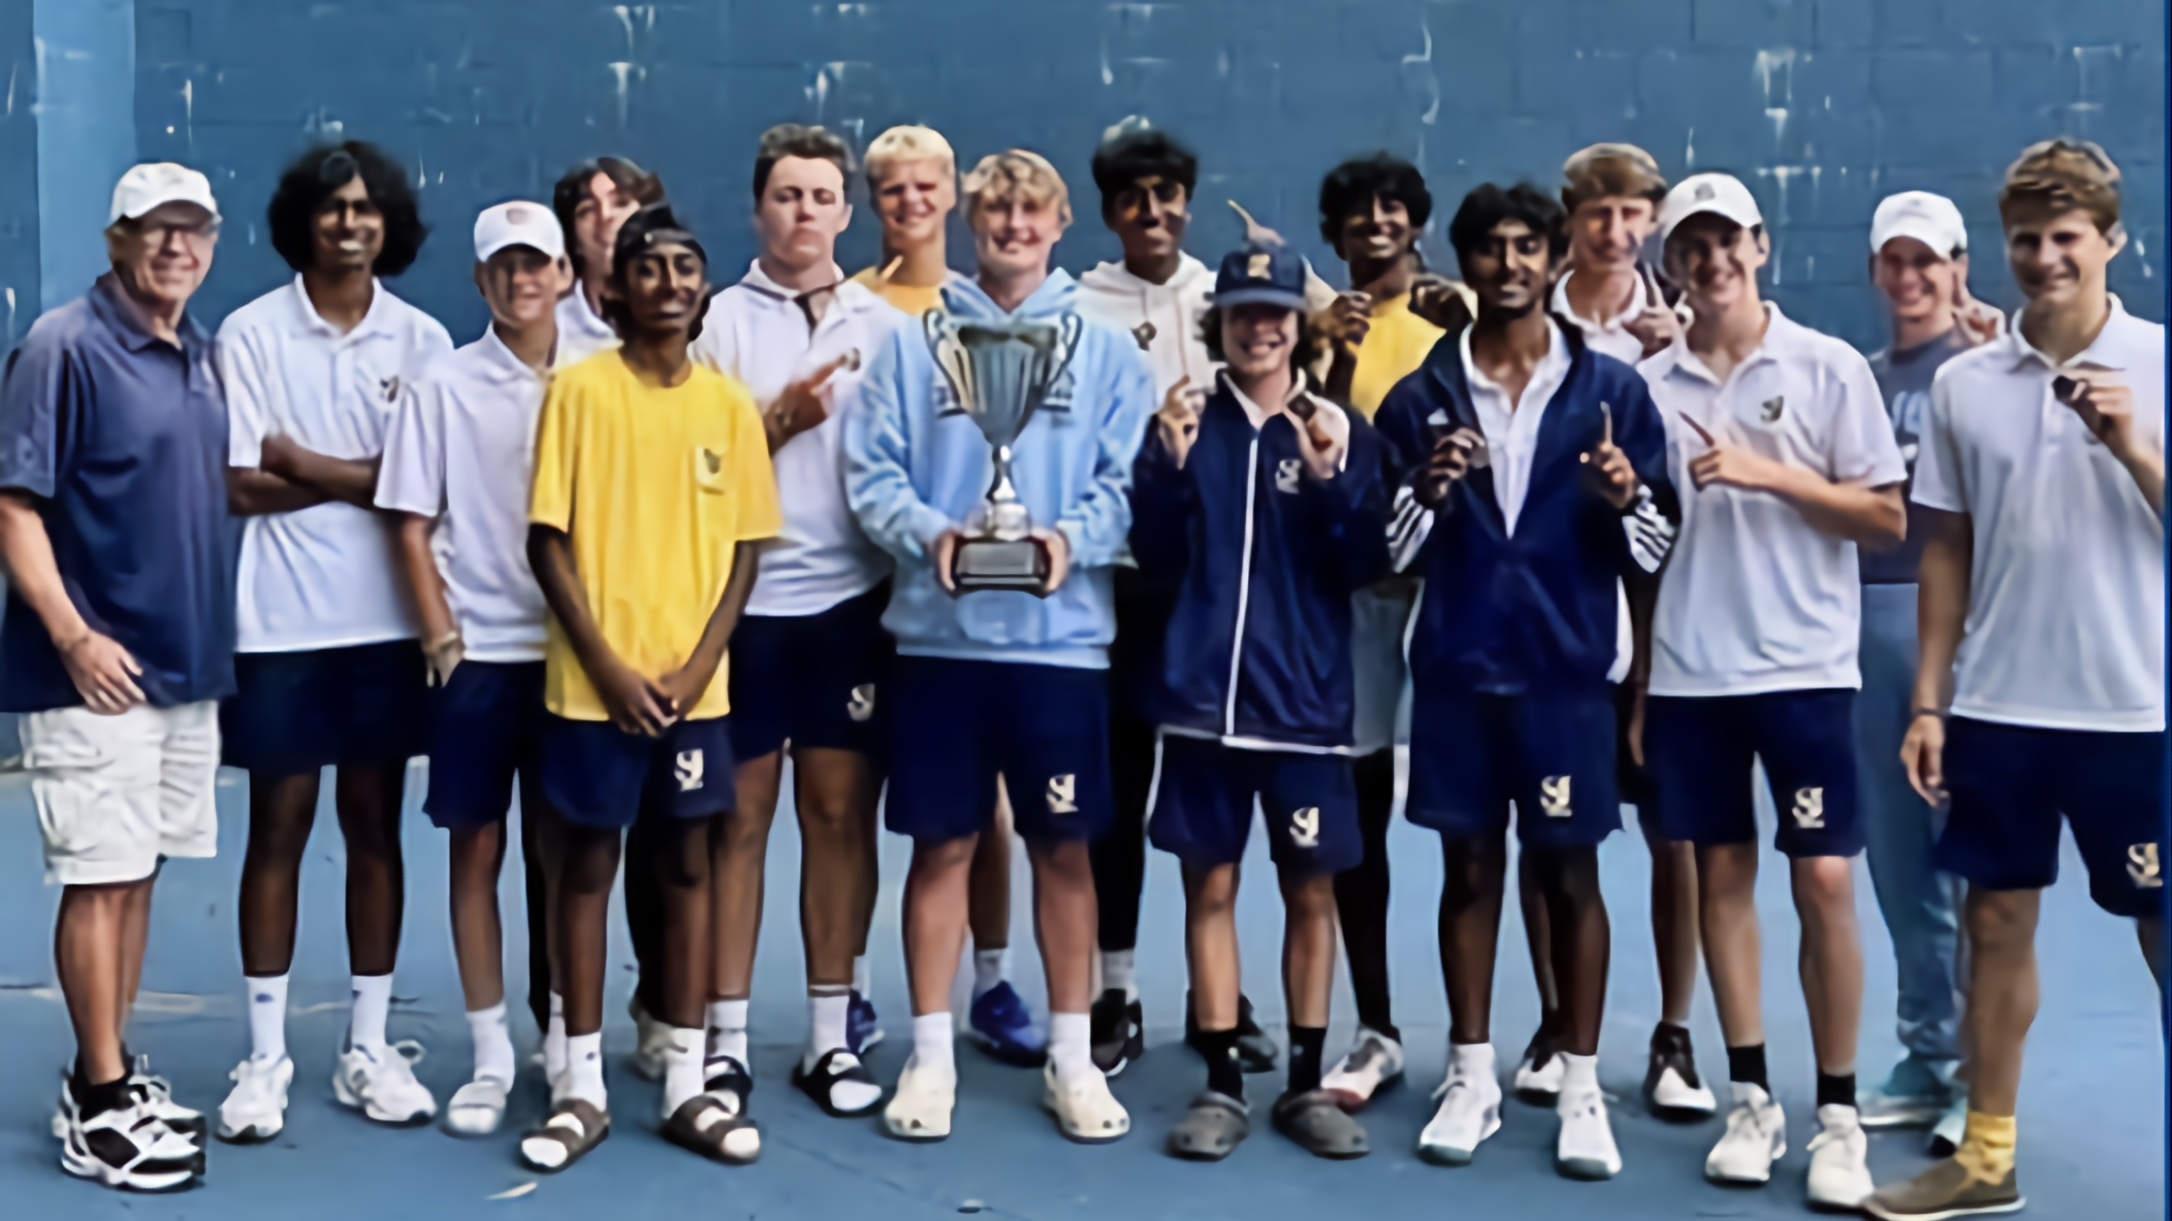 Tennis Regional Champs - Content Image for stjosephhighschool_bigteams_17957